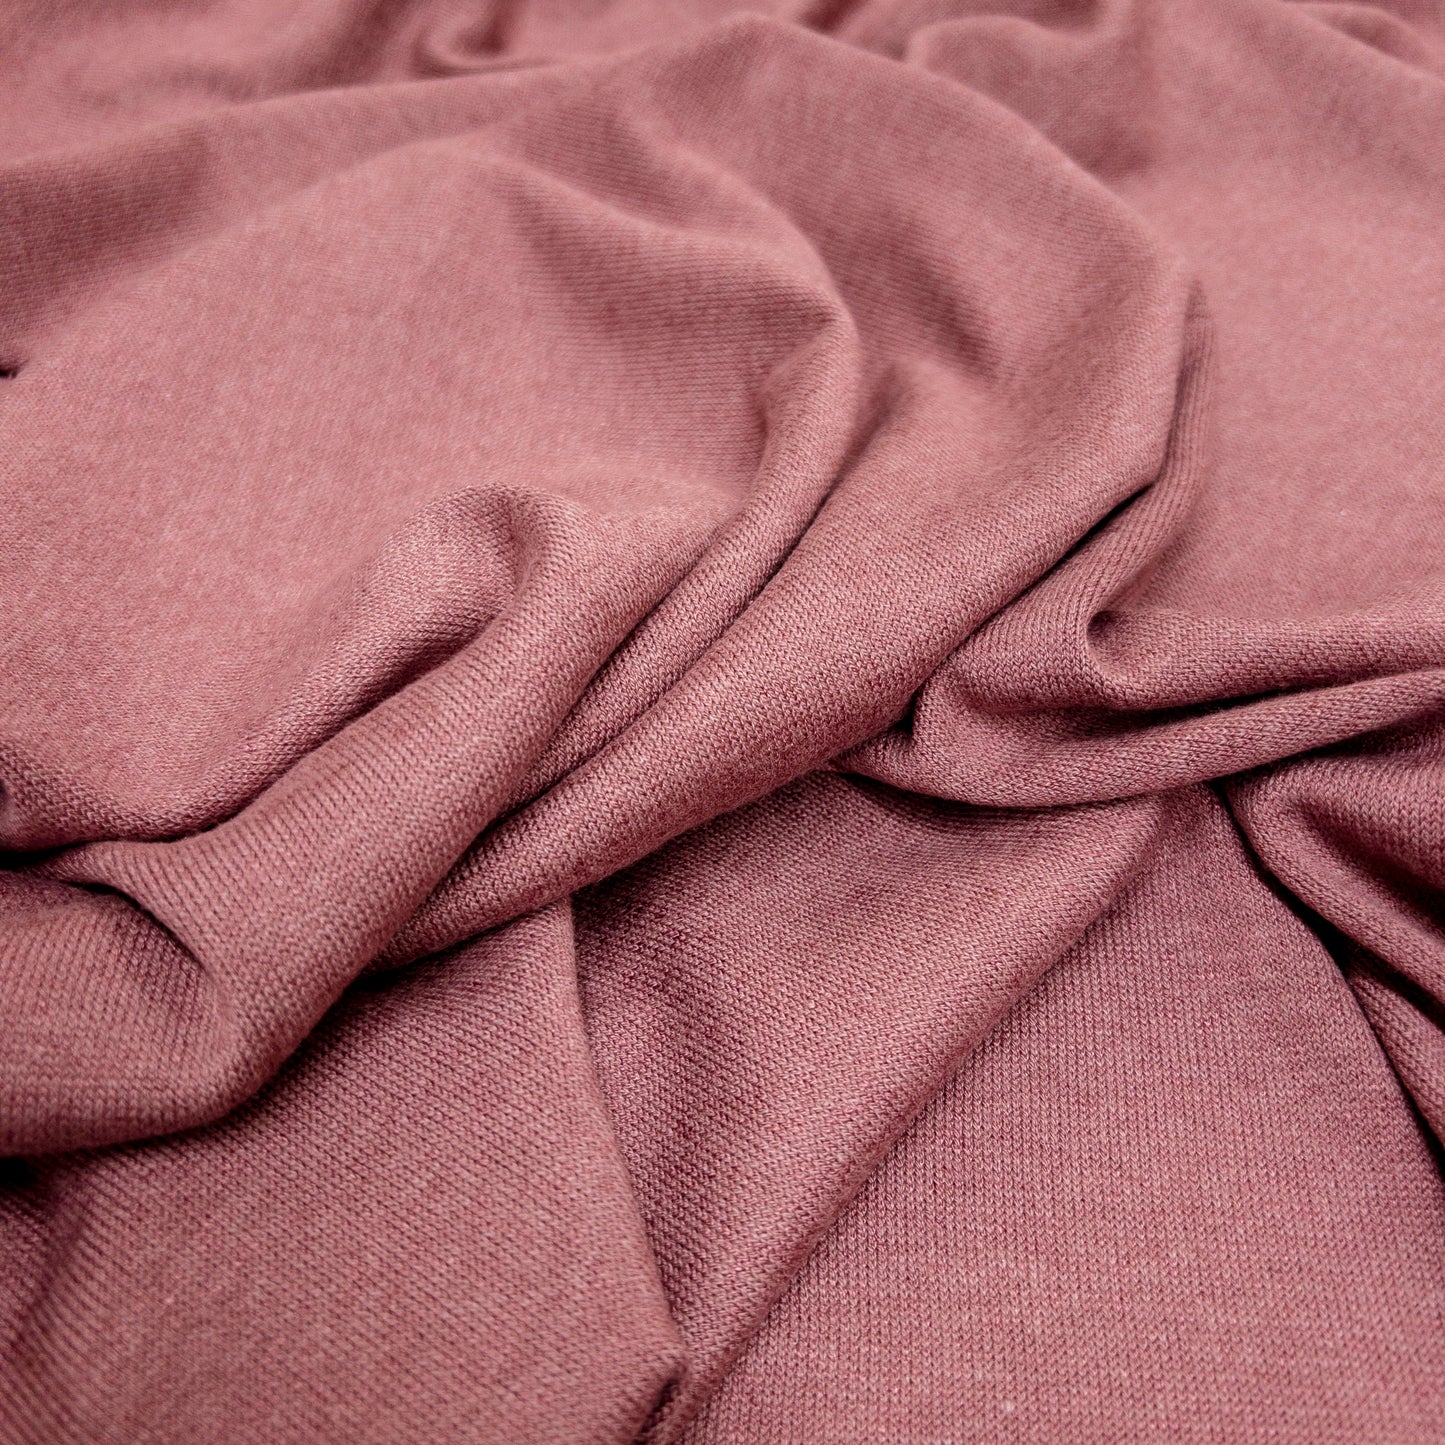 Rayon / Cotton / Modal Knit in Rose Brown